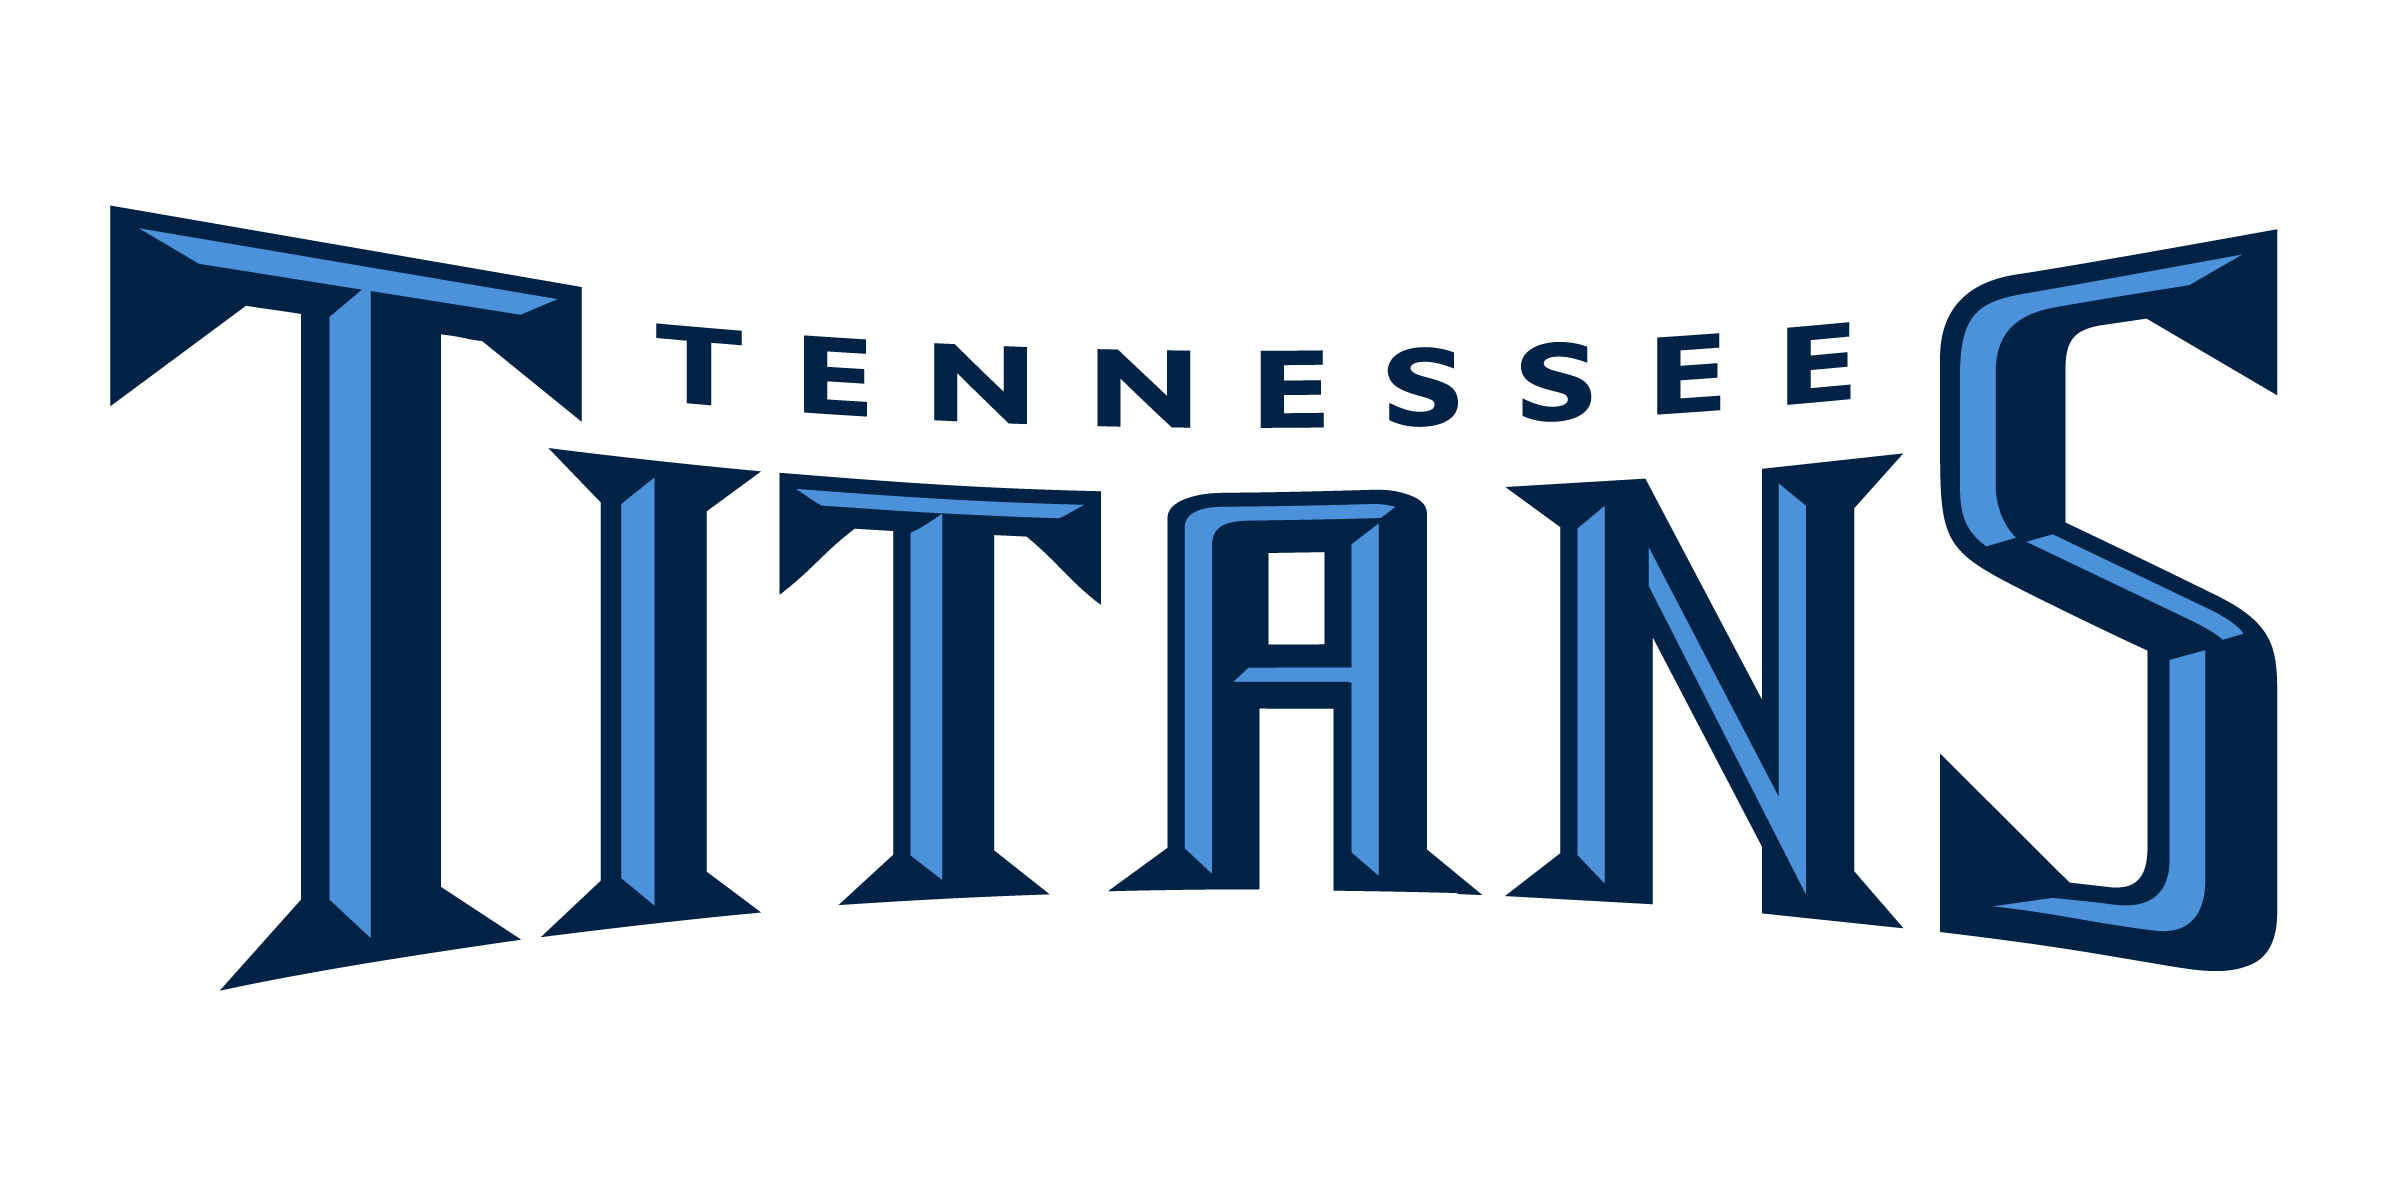 Tennessee Titans Wide Wallpap